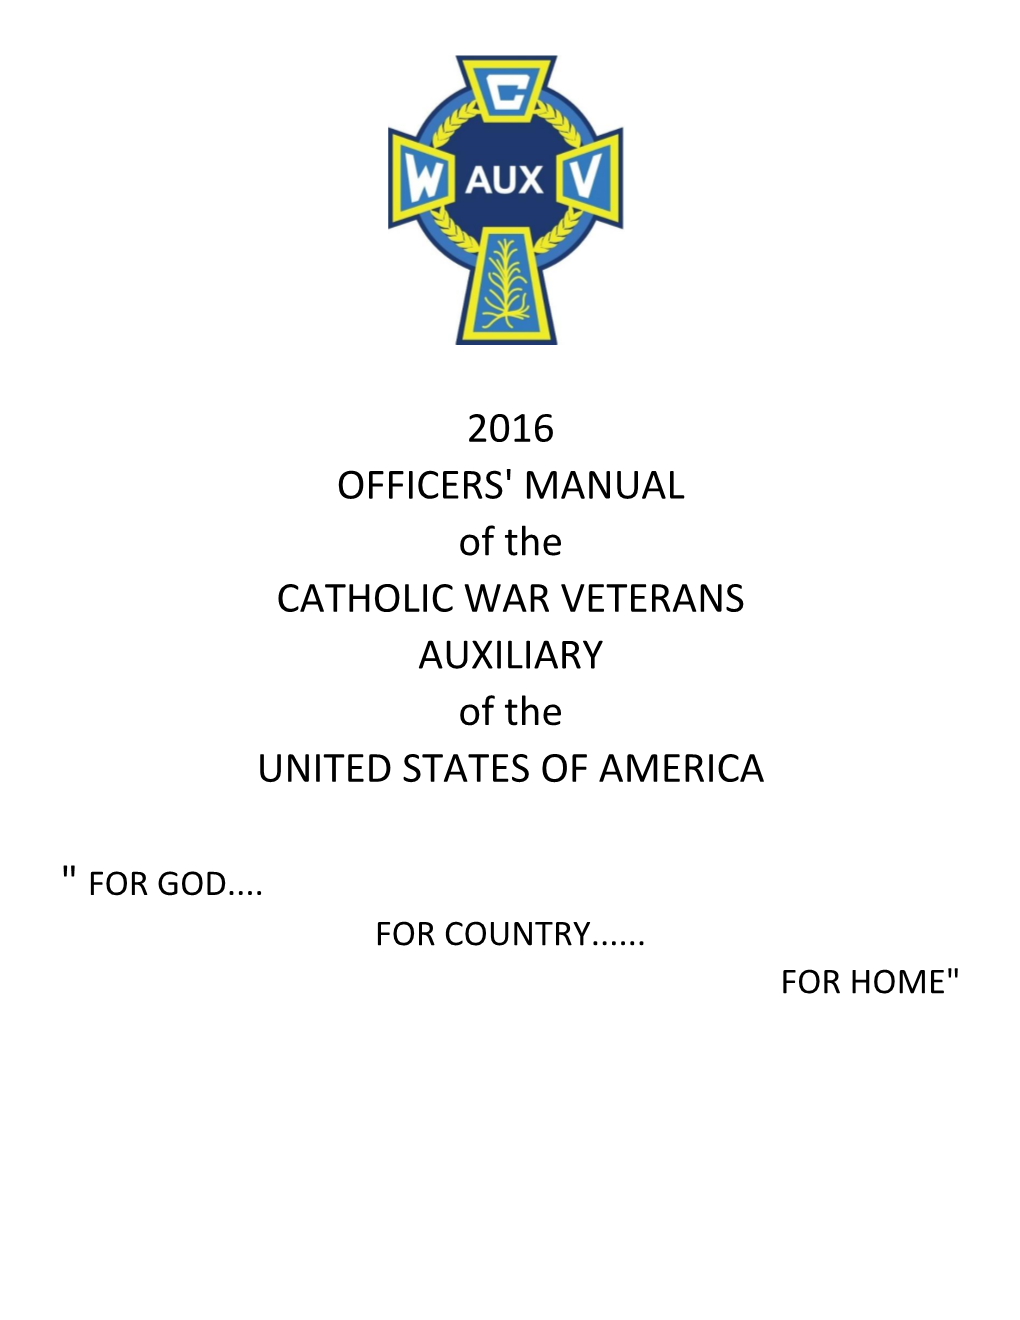 2016 OFFICERS' MANUAL of the CATHOLIC WAR VETERANS AUXILIARY of the UNITED STATES of AMERICA